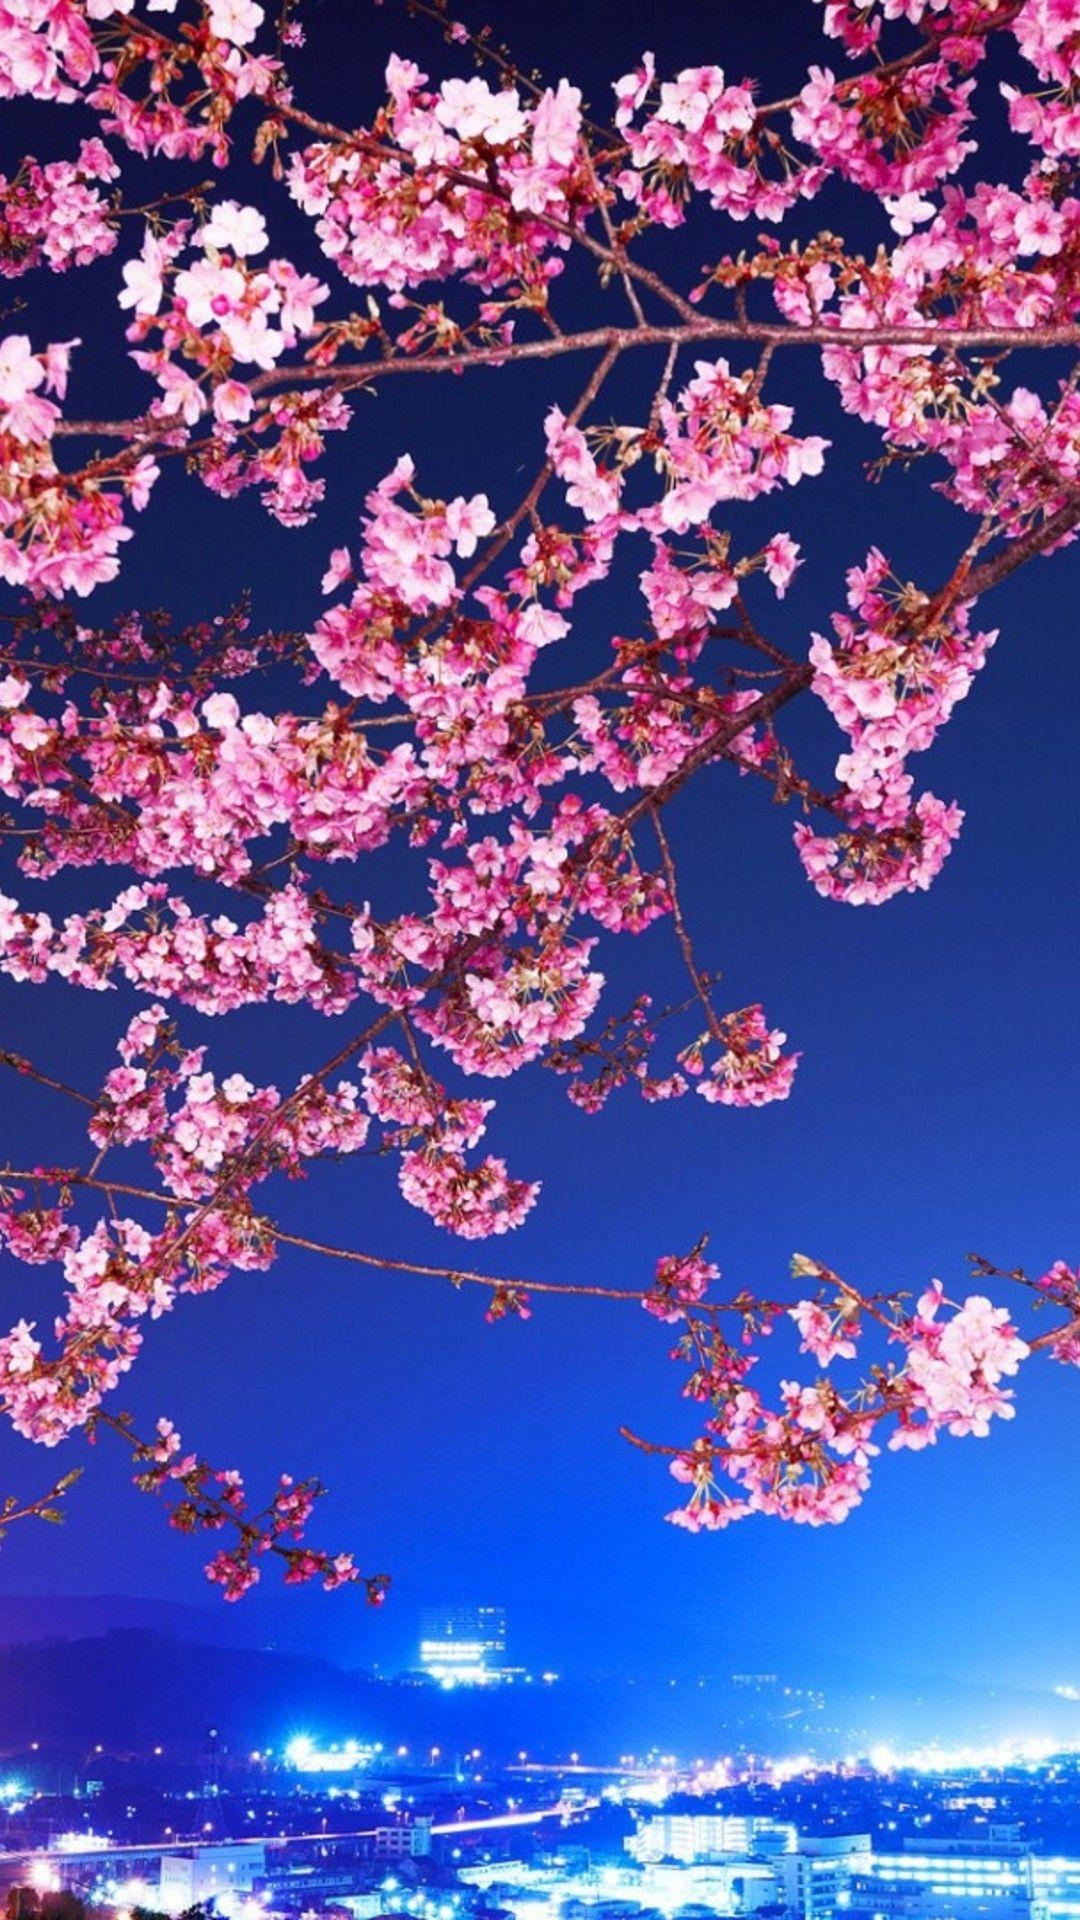 Anime Cherry Blossom Phone Wallpapers